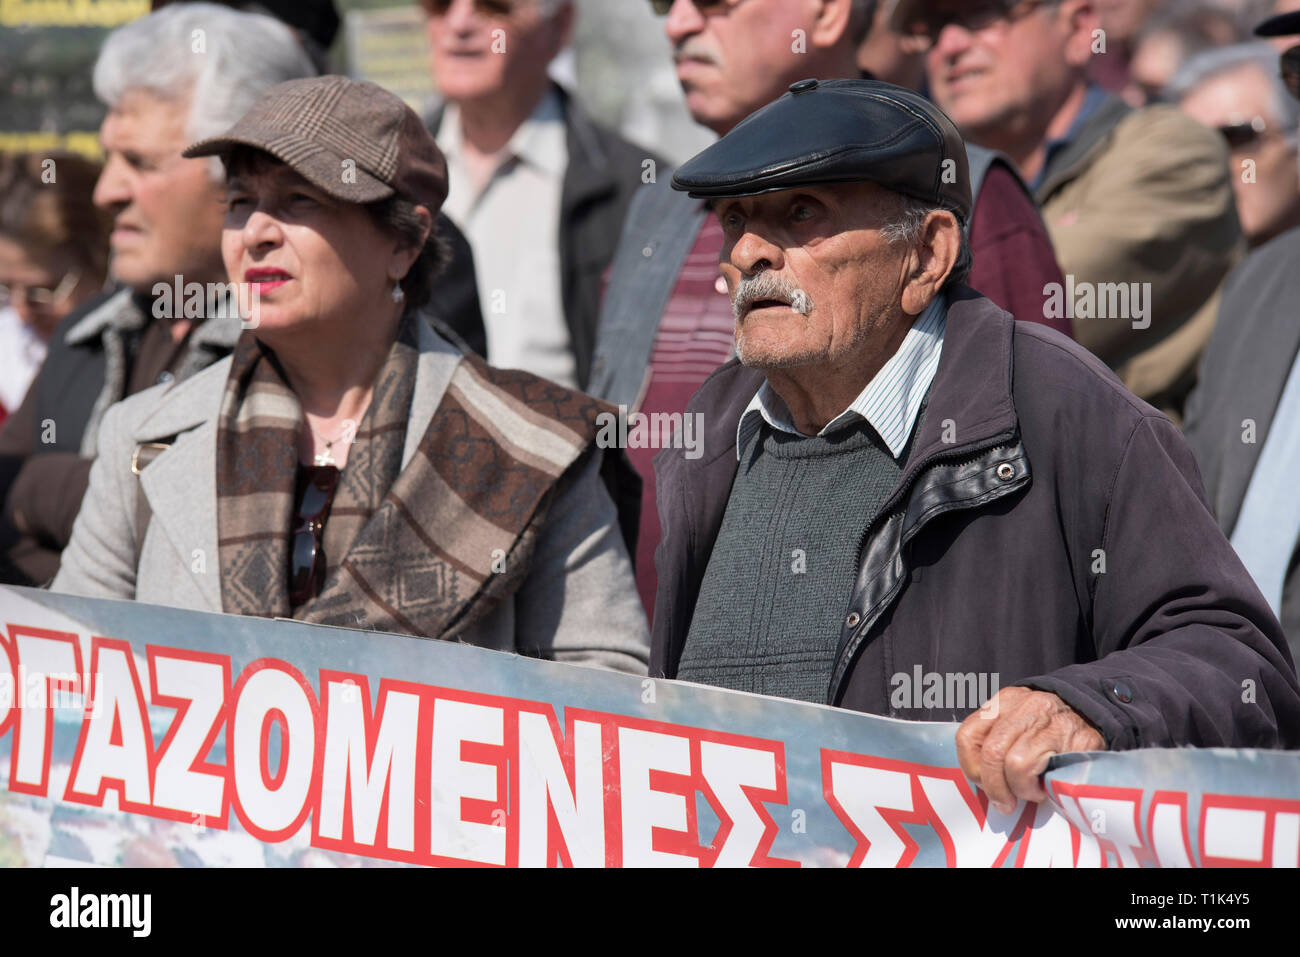 Athens, Greece. 27th Mar 2019. Pensioners march to the prime minister's office at Maximos Mansion shouting slogans against austerity and cuts in social security. Pensioners' unions took to the streets to protest over pension cuts and demand return of their slashed pensions, as their income has been shrinking since Greece entered the bailout deals in 2010. Credit: Nikolas Georgiou/Alamy Live News Stock Photo